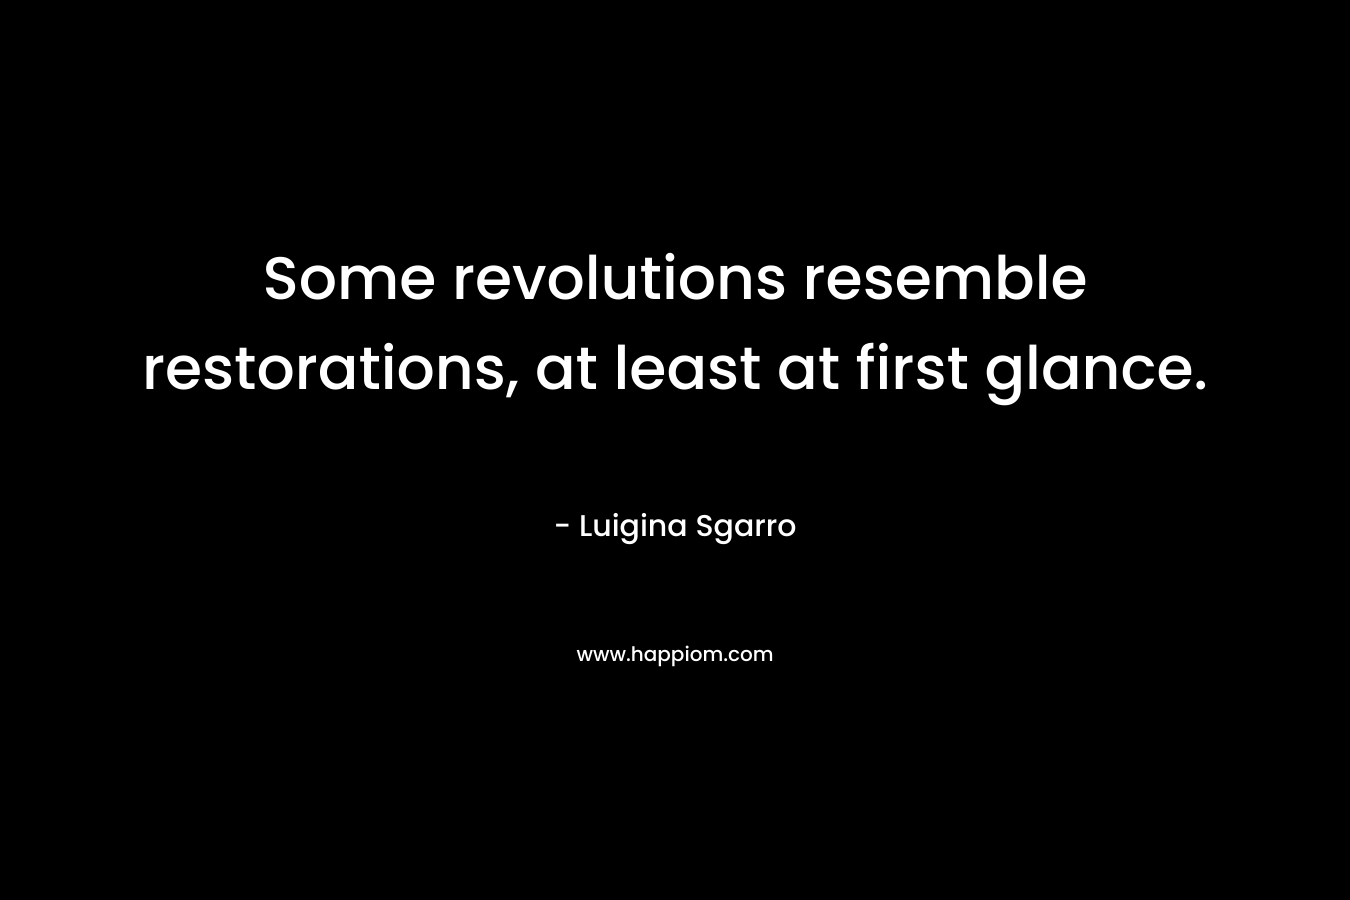 Some revolutions resemble restorations, at least at first glance. – Luigina Sgarro